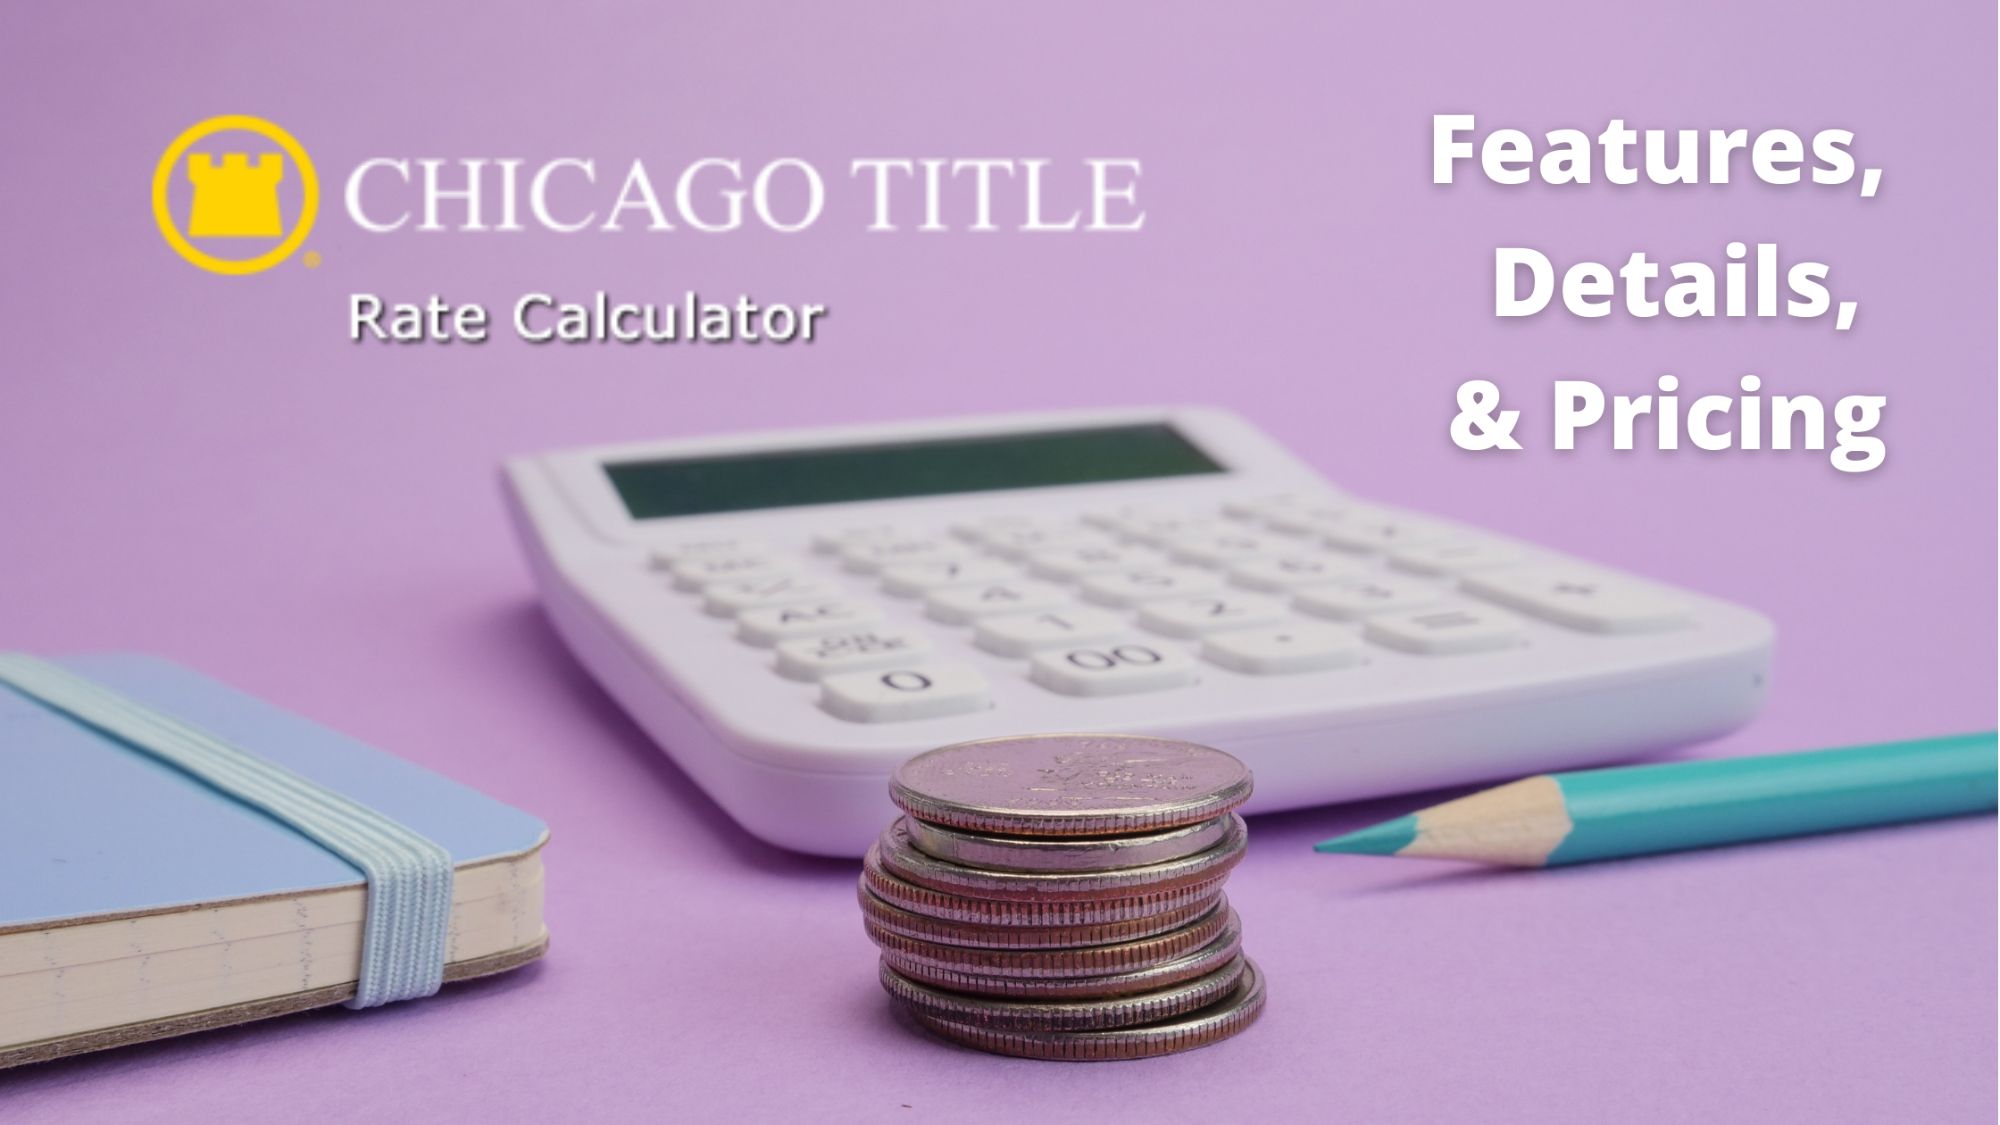 As a title insurance company, there are many different types and brands of title insurance rate calculators out there that you can choose from depending on what’s best for your market. For instance, you can purchase an off-the-shelf branded title quote app like Net